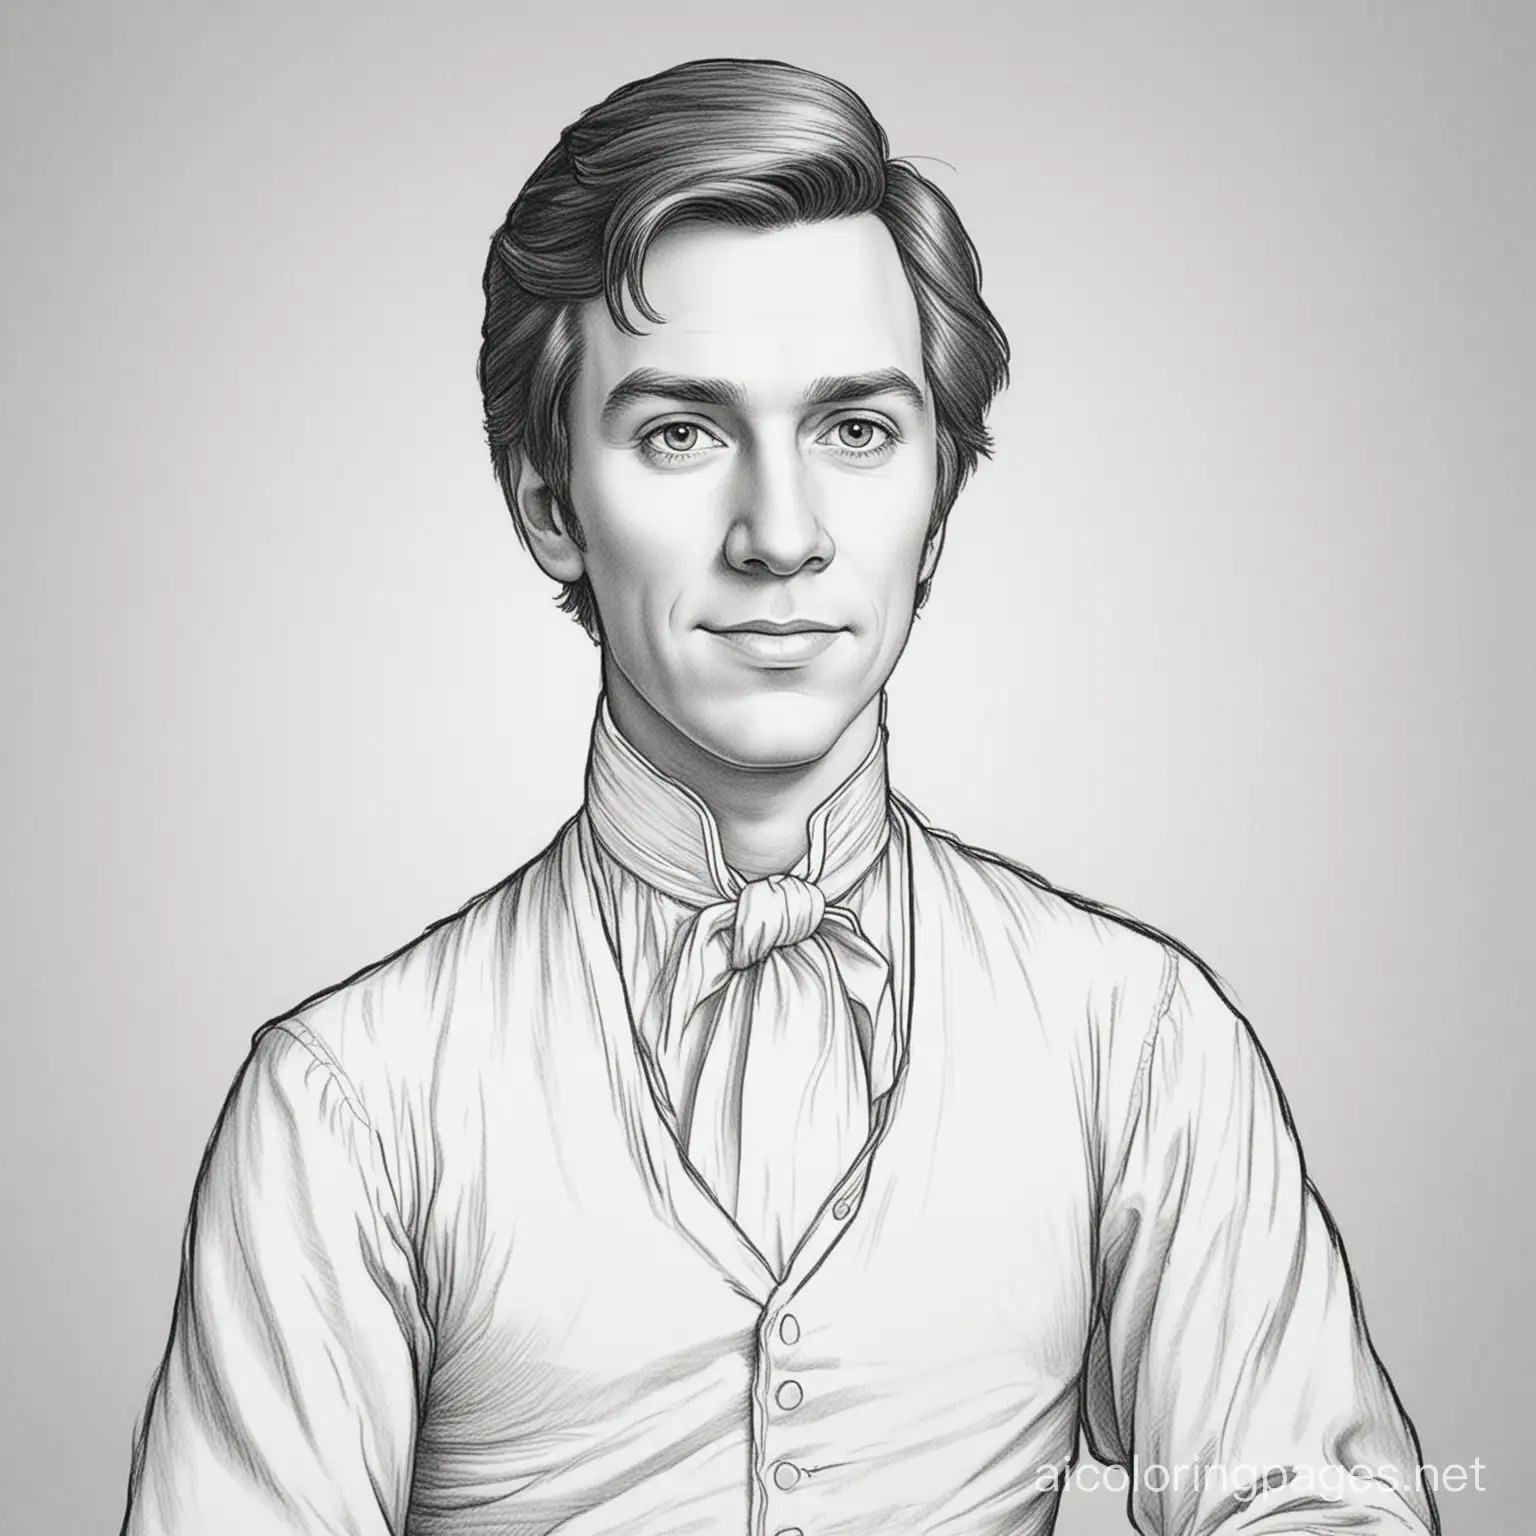 joseph smith jr American 1820 prophet, Coloring Page, black and white, line art, white background, Simplicity, Ample White Space. The background of the coloring page is plain white to make it easy for young children to color within the lines. The outlines of all the subjects are easy to distinguish, making it simple for kids to color without too much difficulty